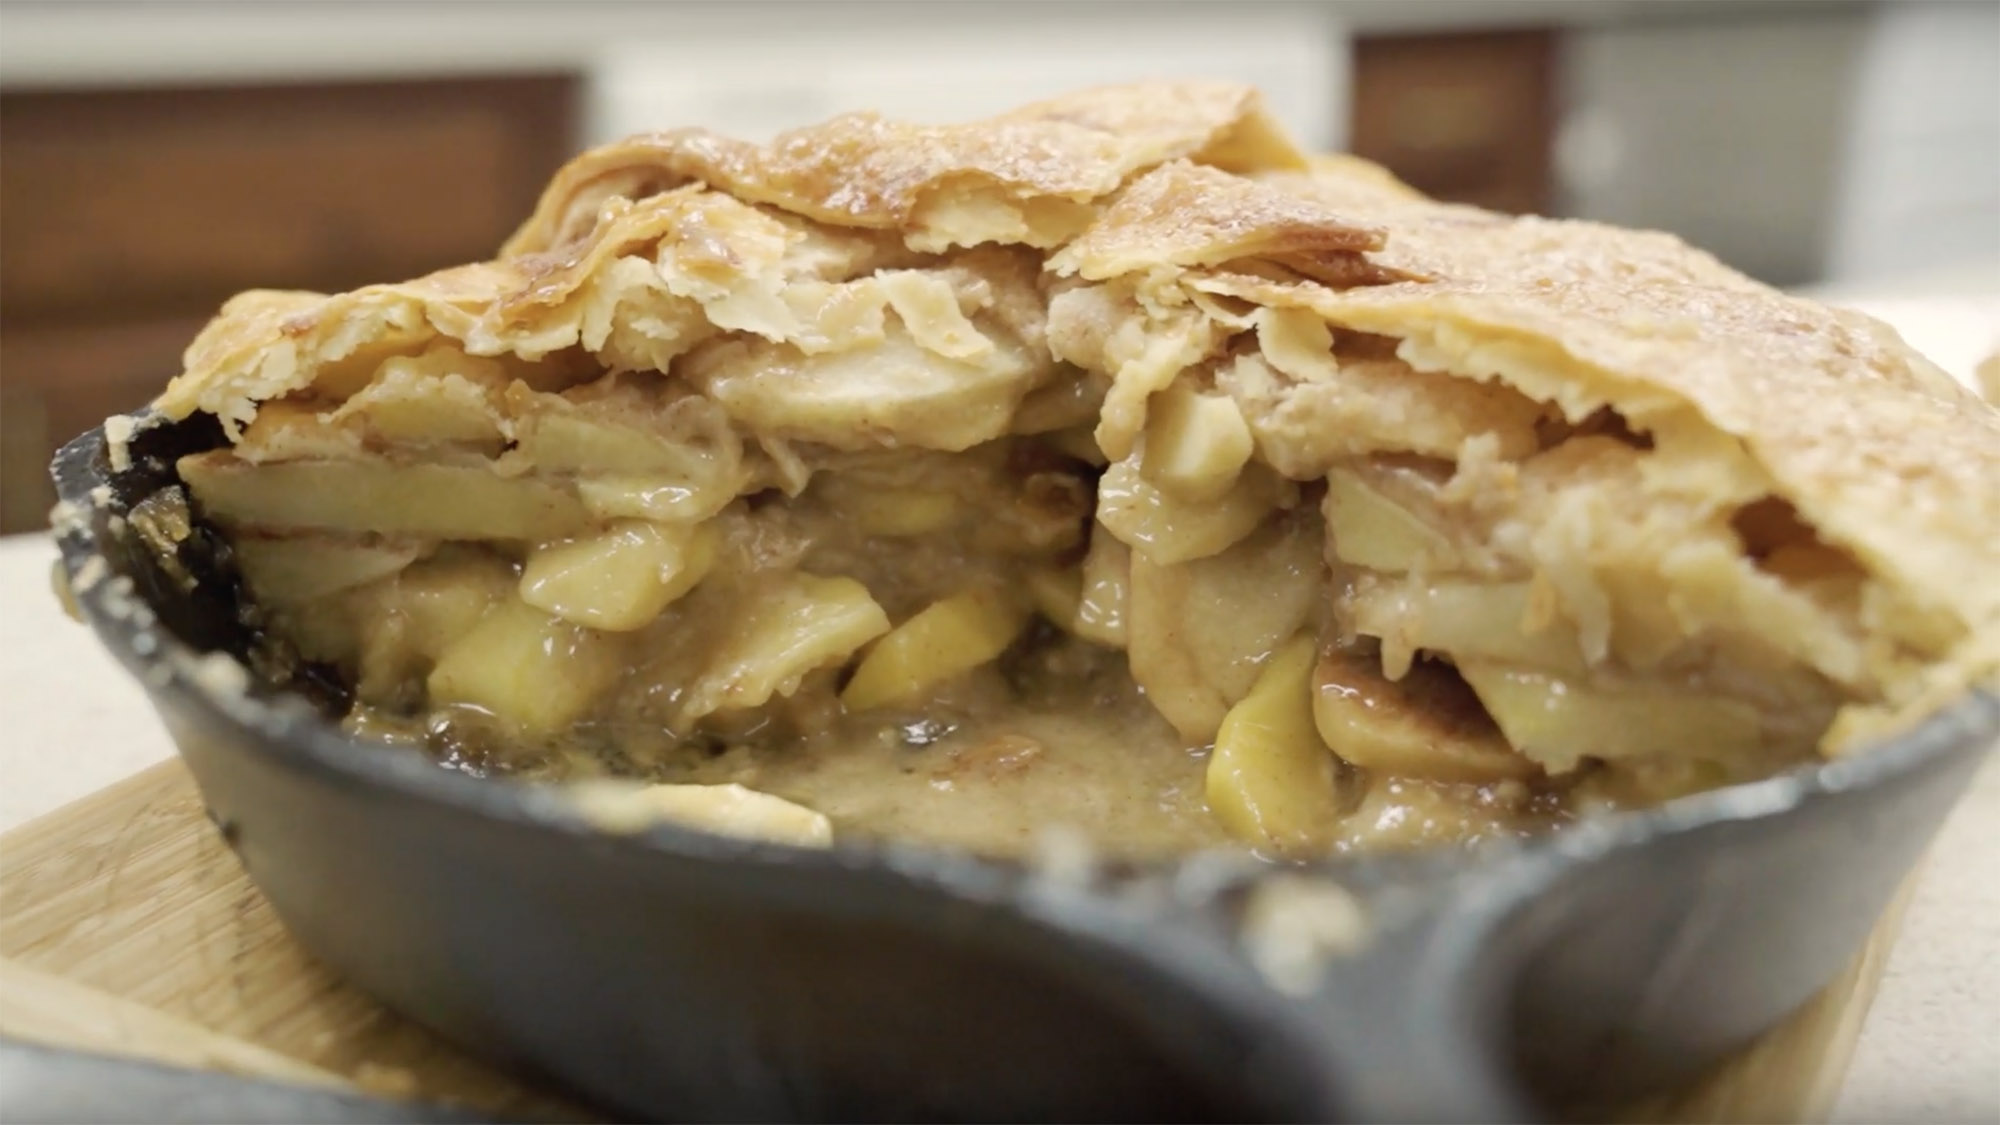 A fully-baked mountain high apple pie still in the skillet with a slice cut out showing the apples and ooey gooey goodness inside.